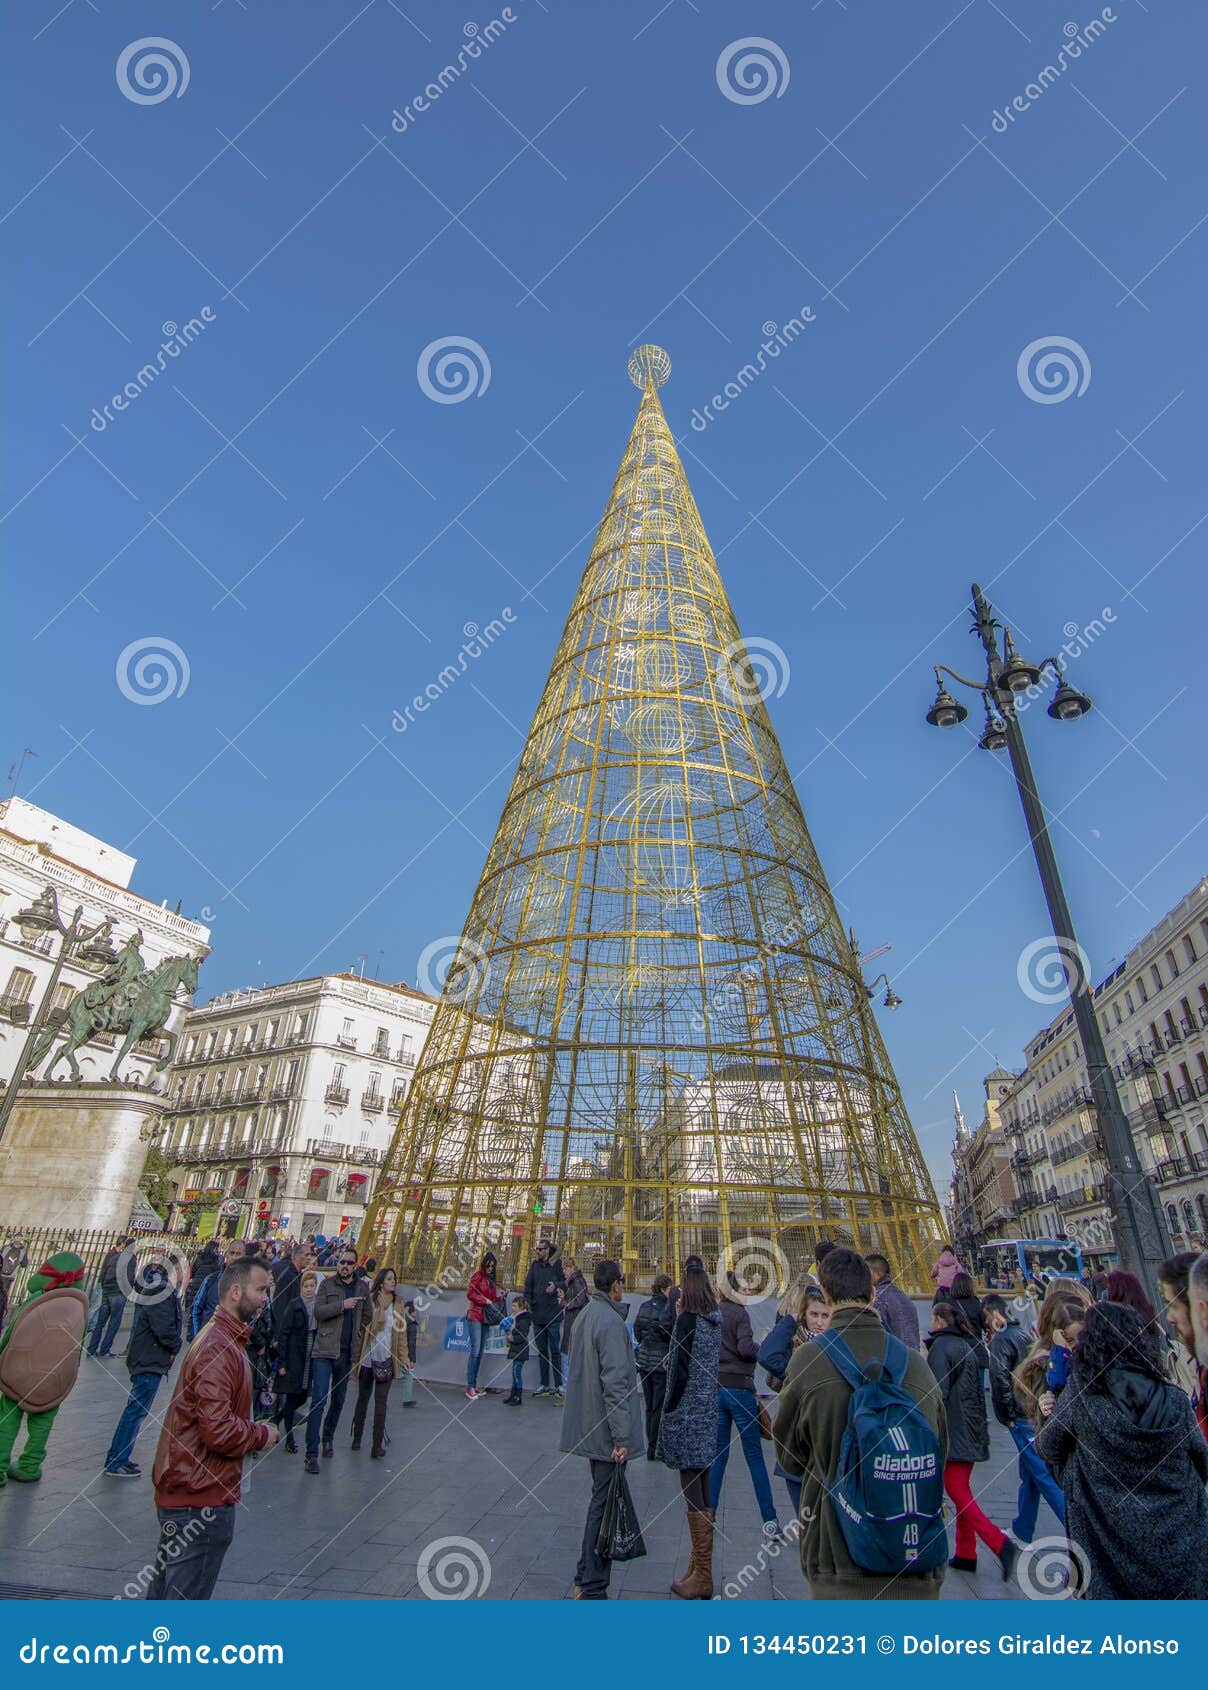 Madrid A Natale.Christmas Tree At Puerta Del Sol In Madrid Spain Editorial Photo Image Of Tree Christmas 134450231